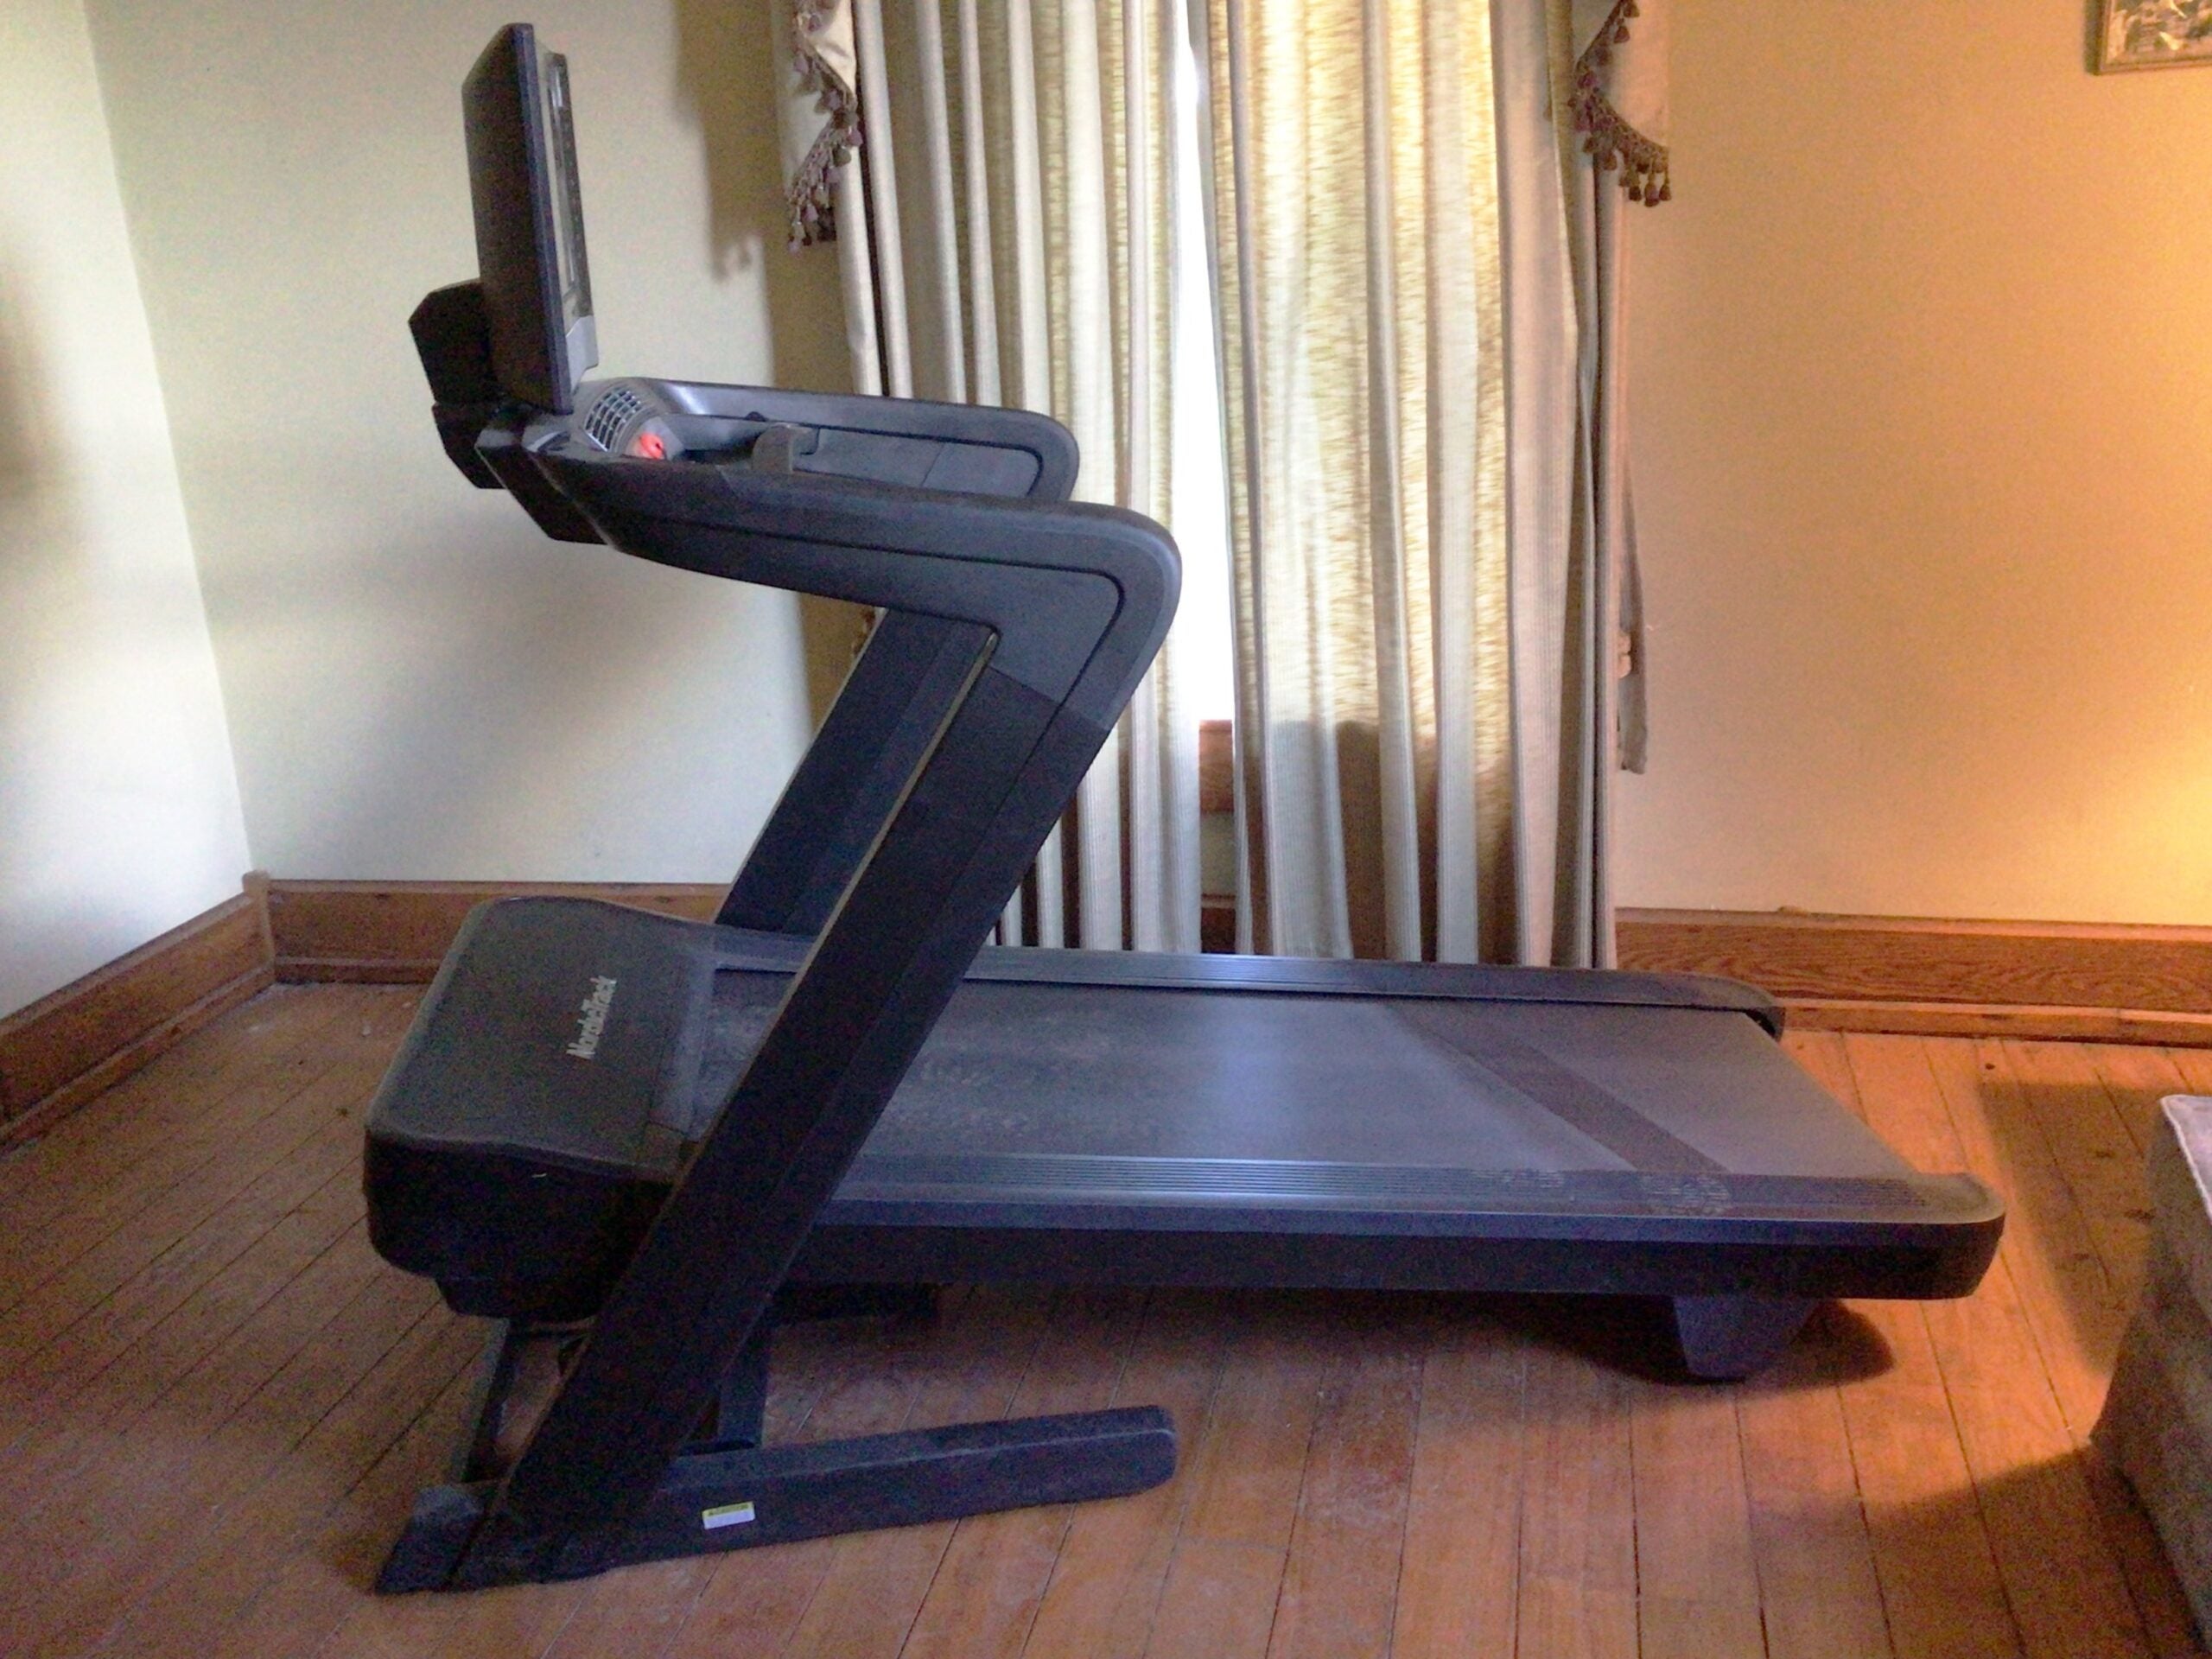 Side view of the 2022 Nordictrack 1750 treadmill on a wooden floor